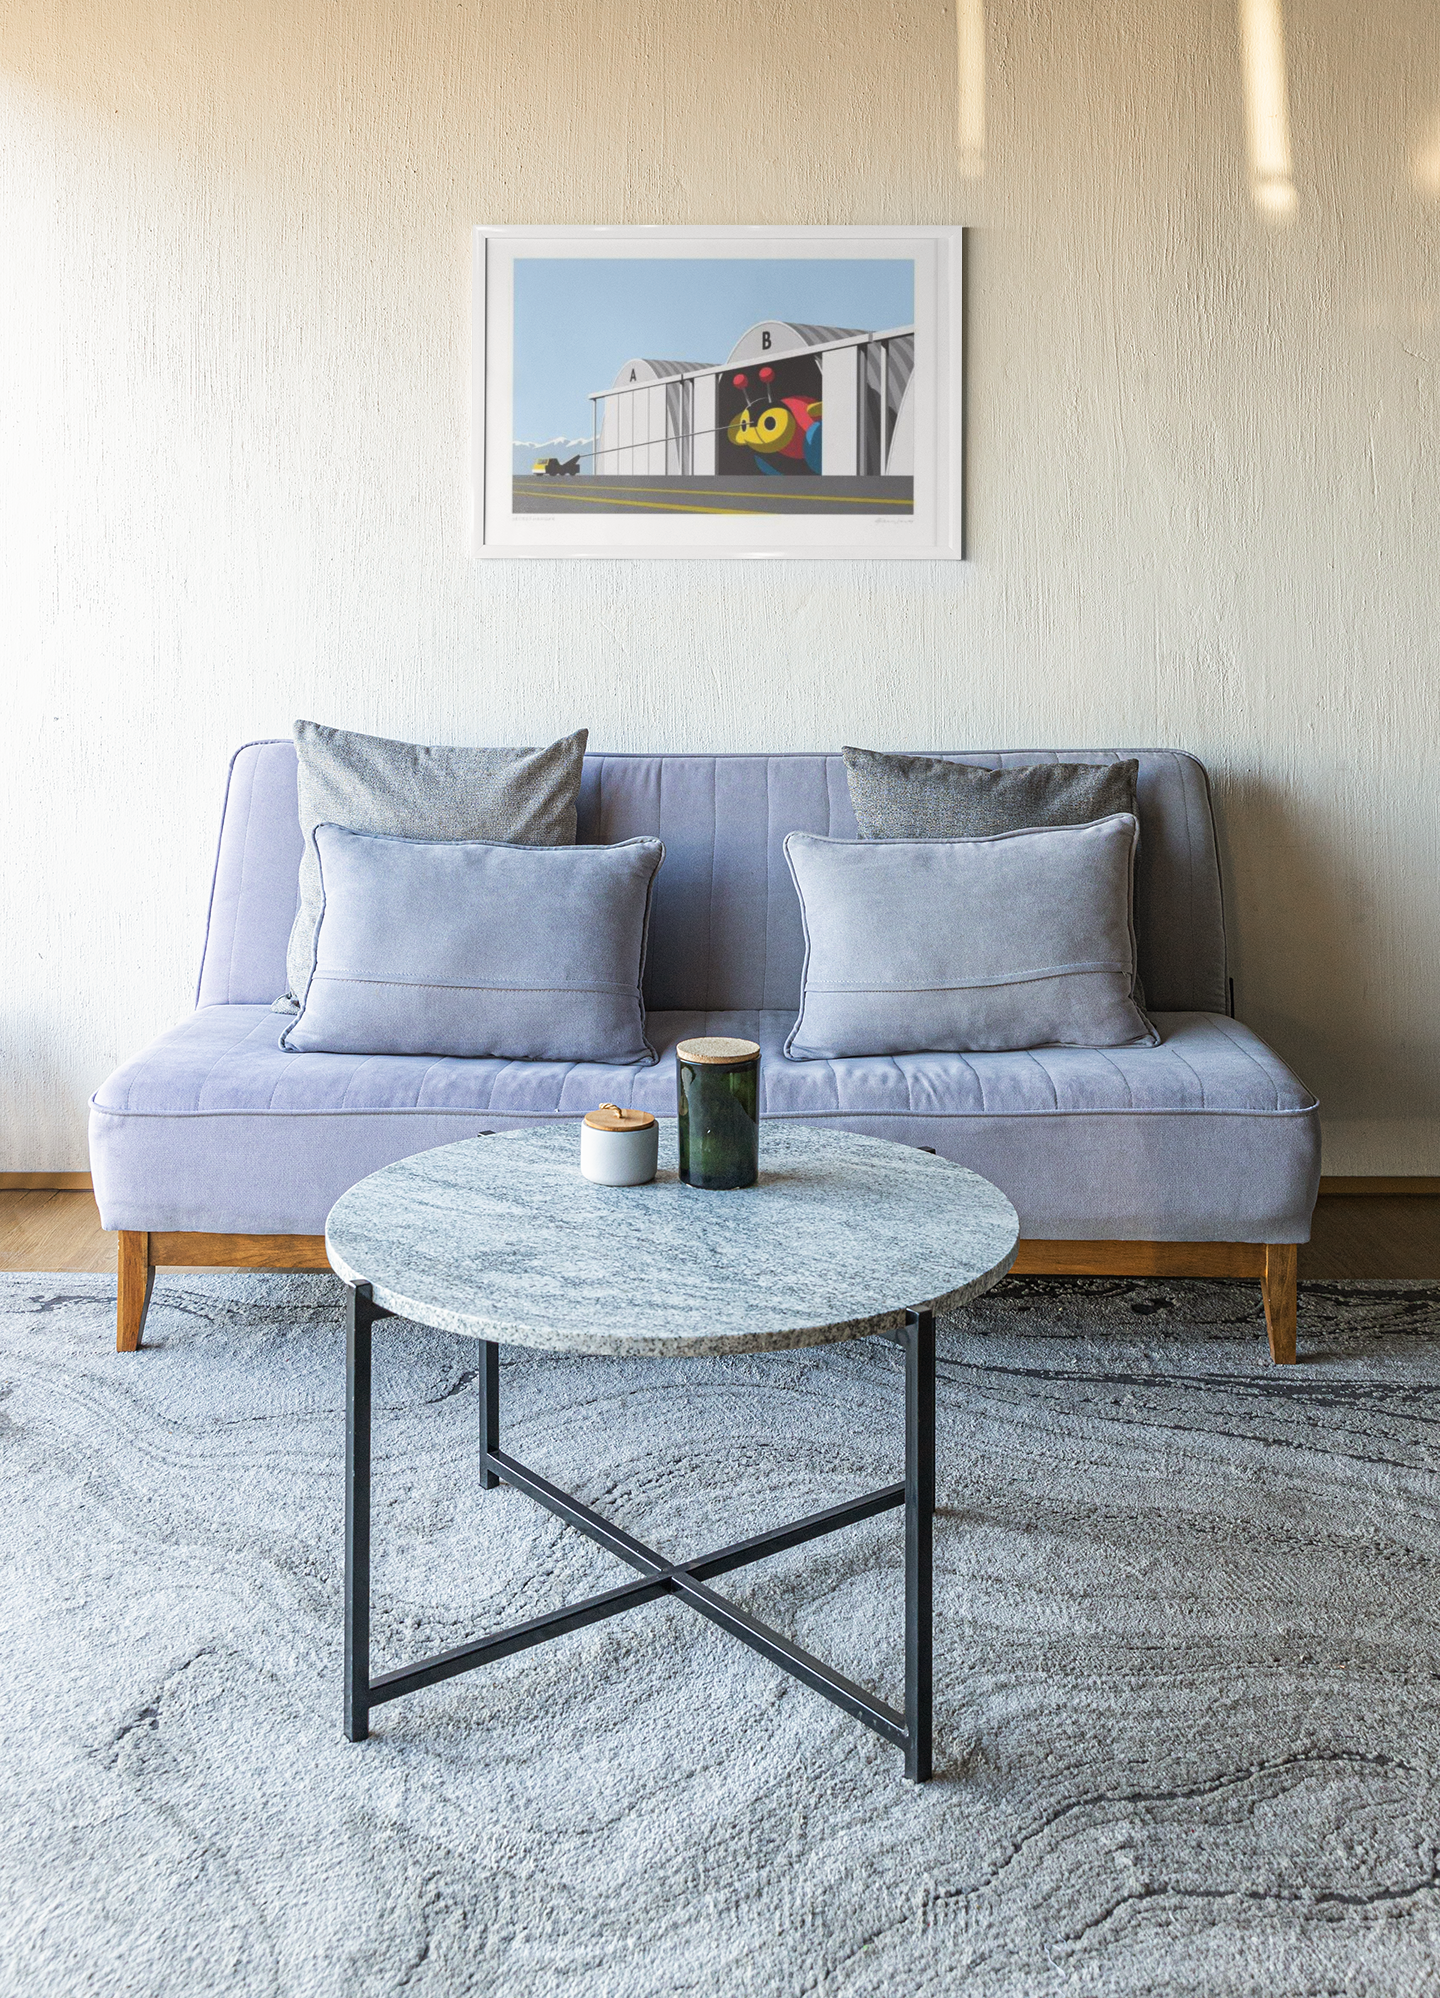 A cozy living room corner featuring a modern Secret Hangar sofa by Glenn Jones adorned with matching cushions, paired with a round, marble-top coffee table on which rest a candle and a drinking cup, all set against a clean.